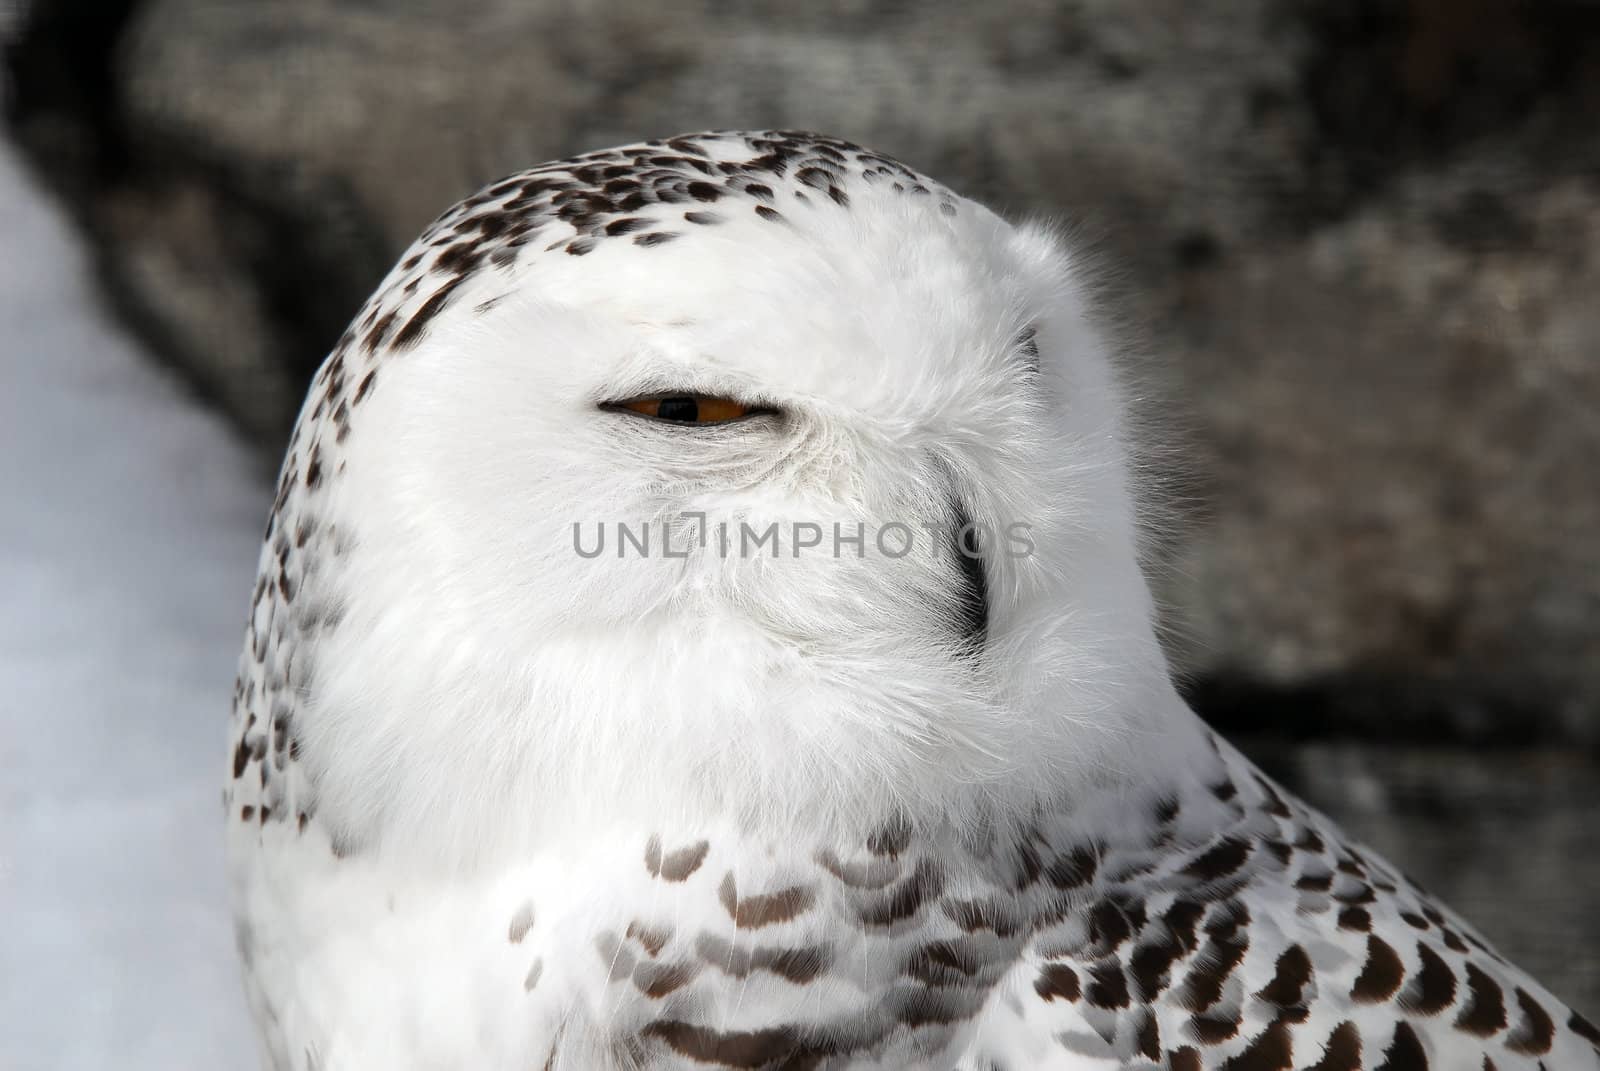 Close-up picture of a male Snowy Owl